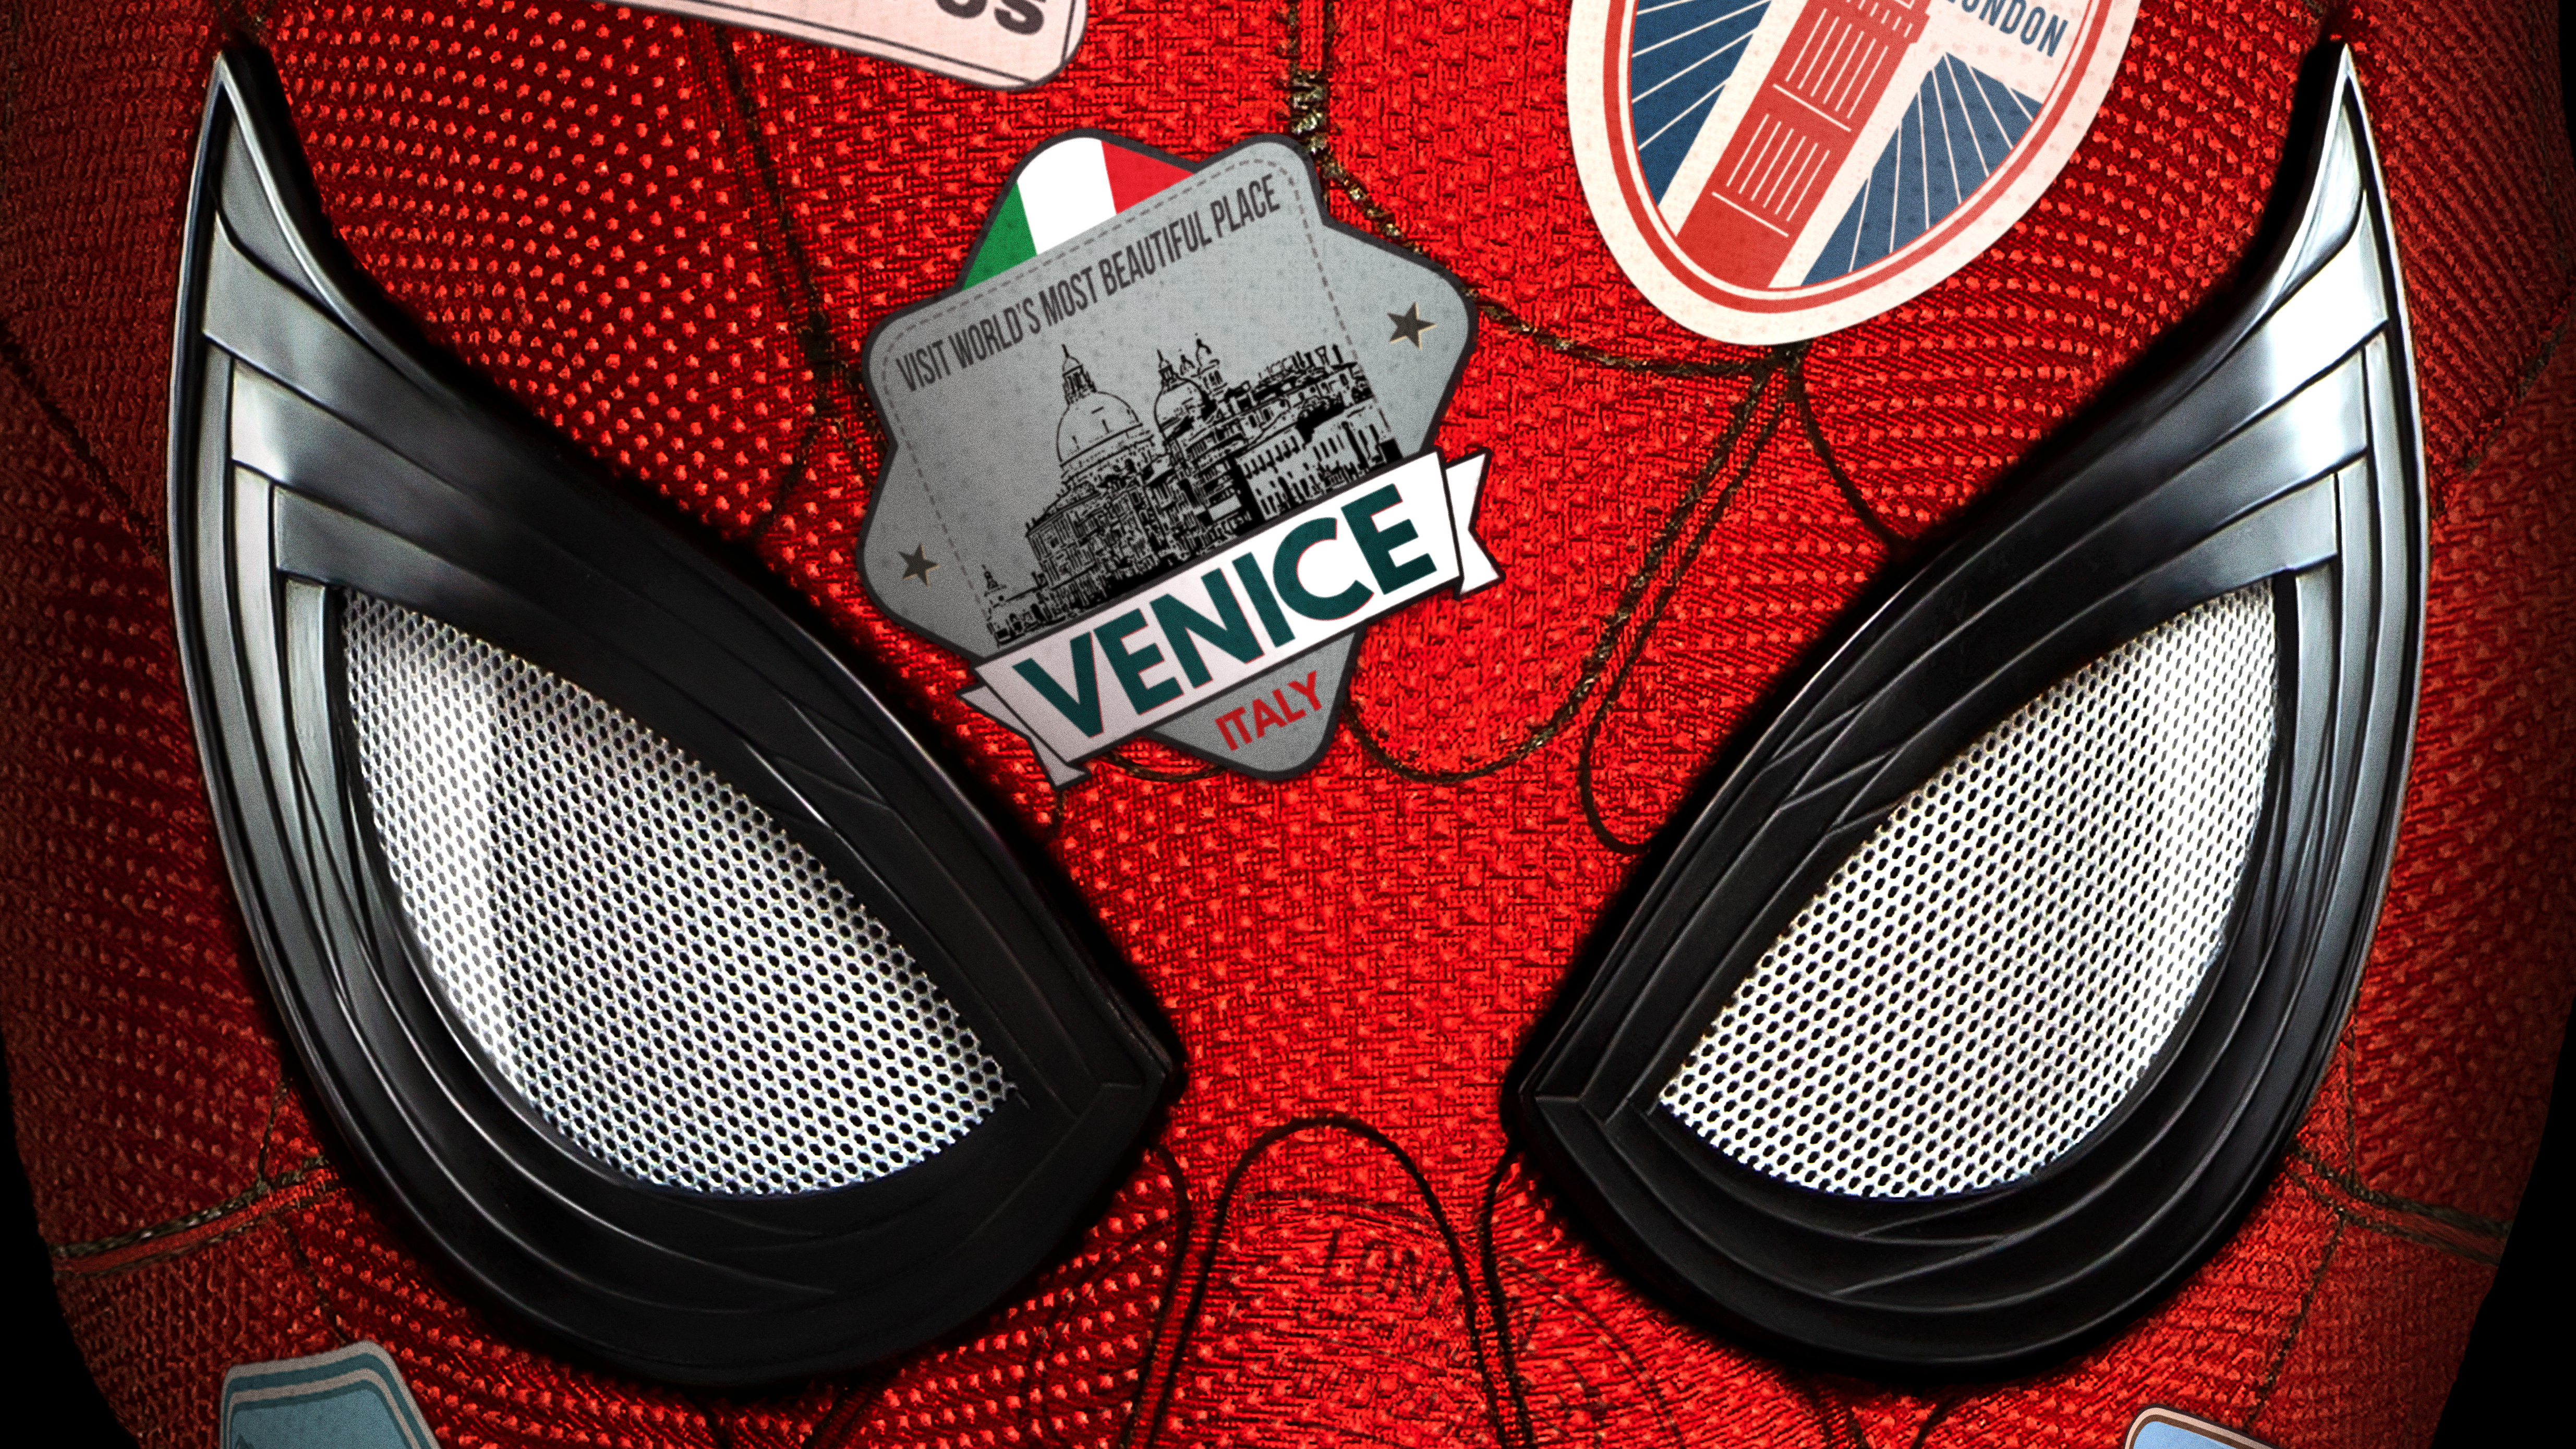 Spider Man Far From Home 4k Ultra HD Wallpaper Background Image